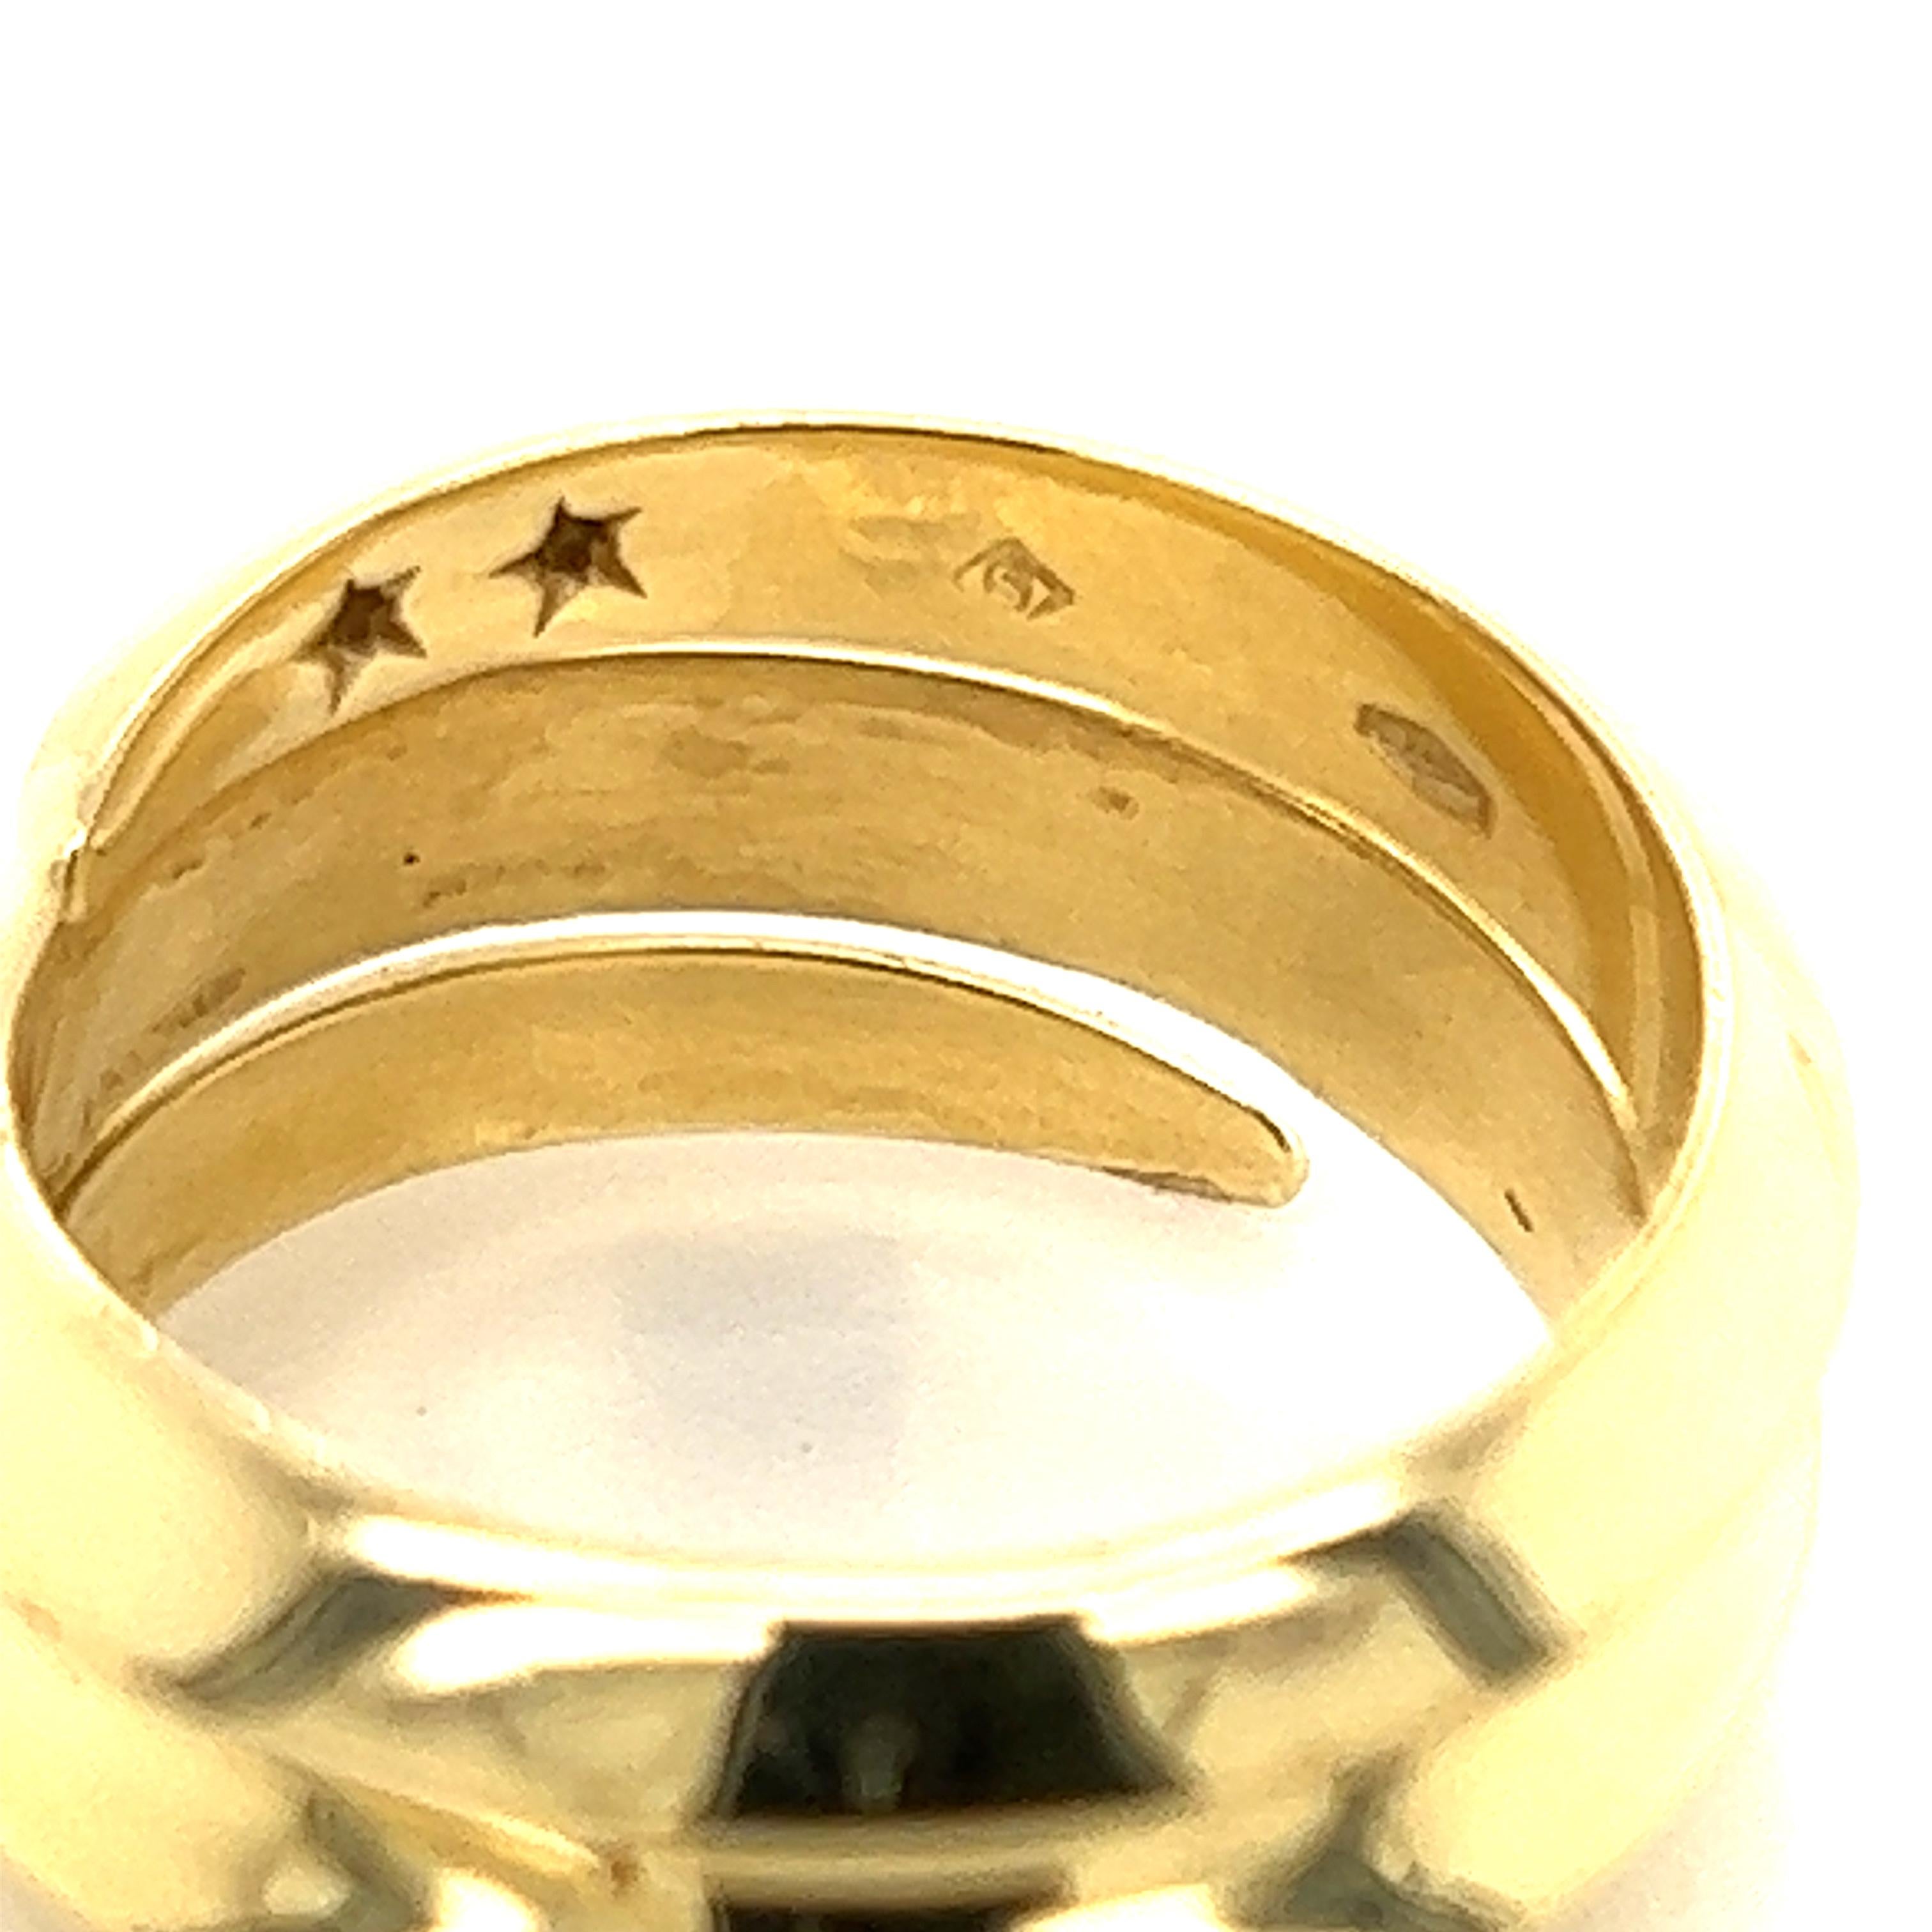 Brand:  H.Stern
Hallmark:  750 S
Material:  18k yellow gold 
Ring Size:  6
Measurement: front of band: 10mm wide x 3mm high
Weight: 9.7 grams

From designer H.Stern is this unique and elegant ring, crafted from 18k yellow gold with a high polished